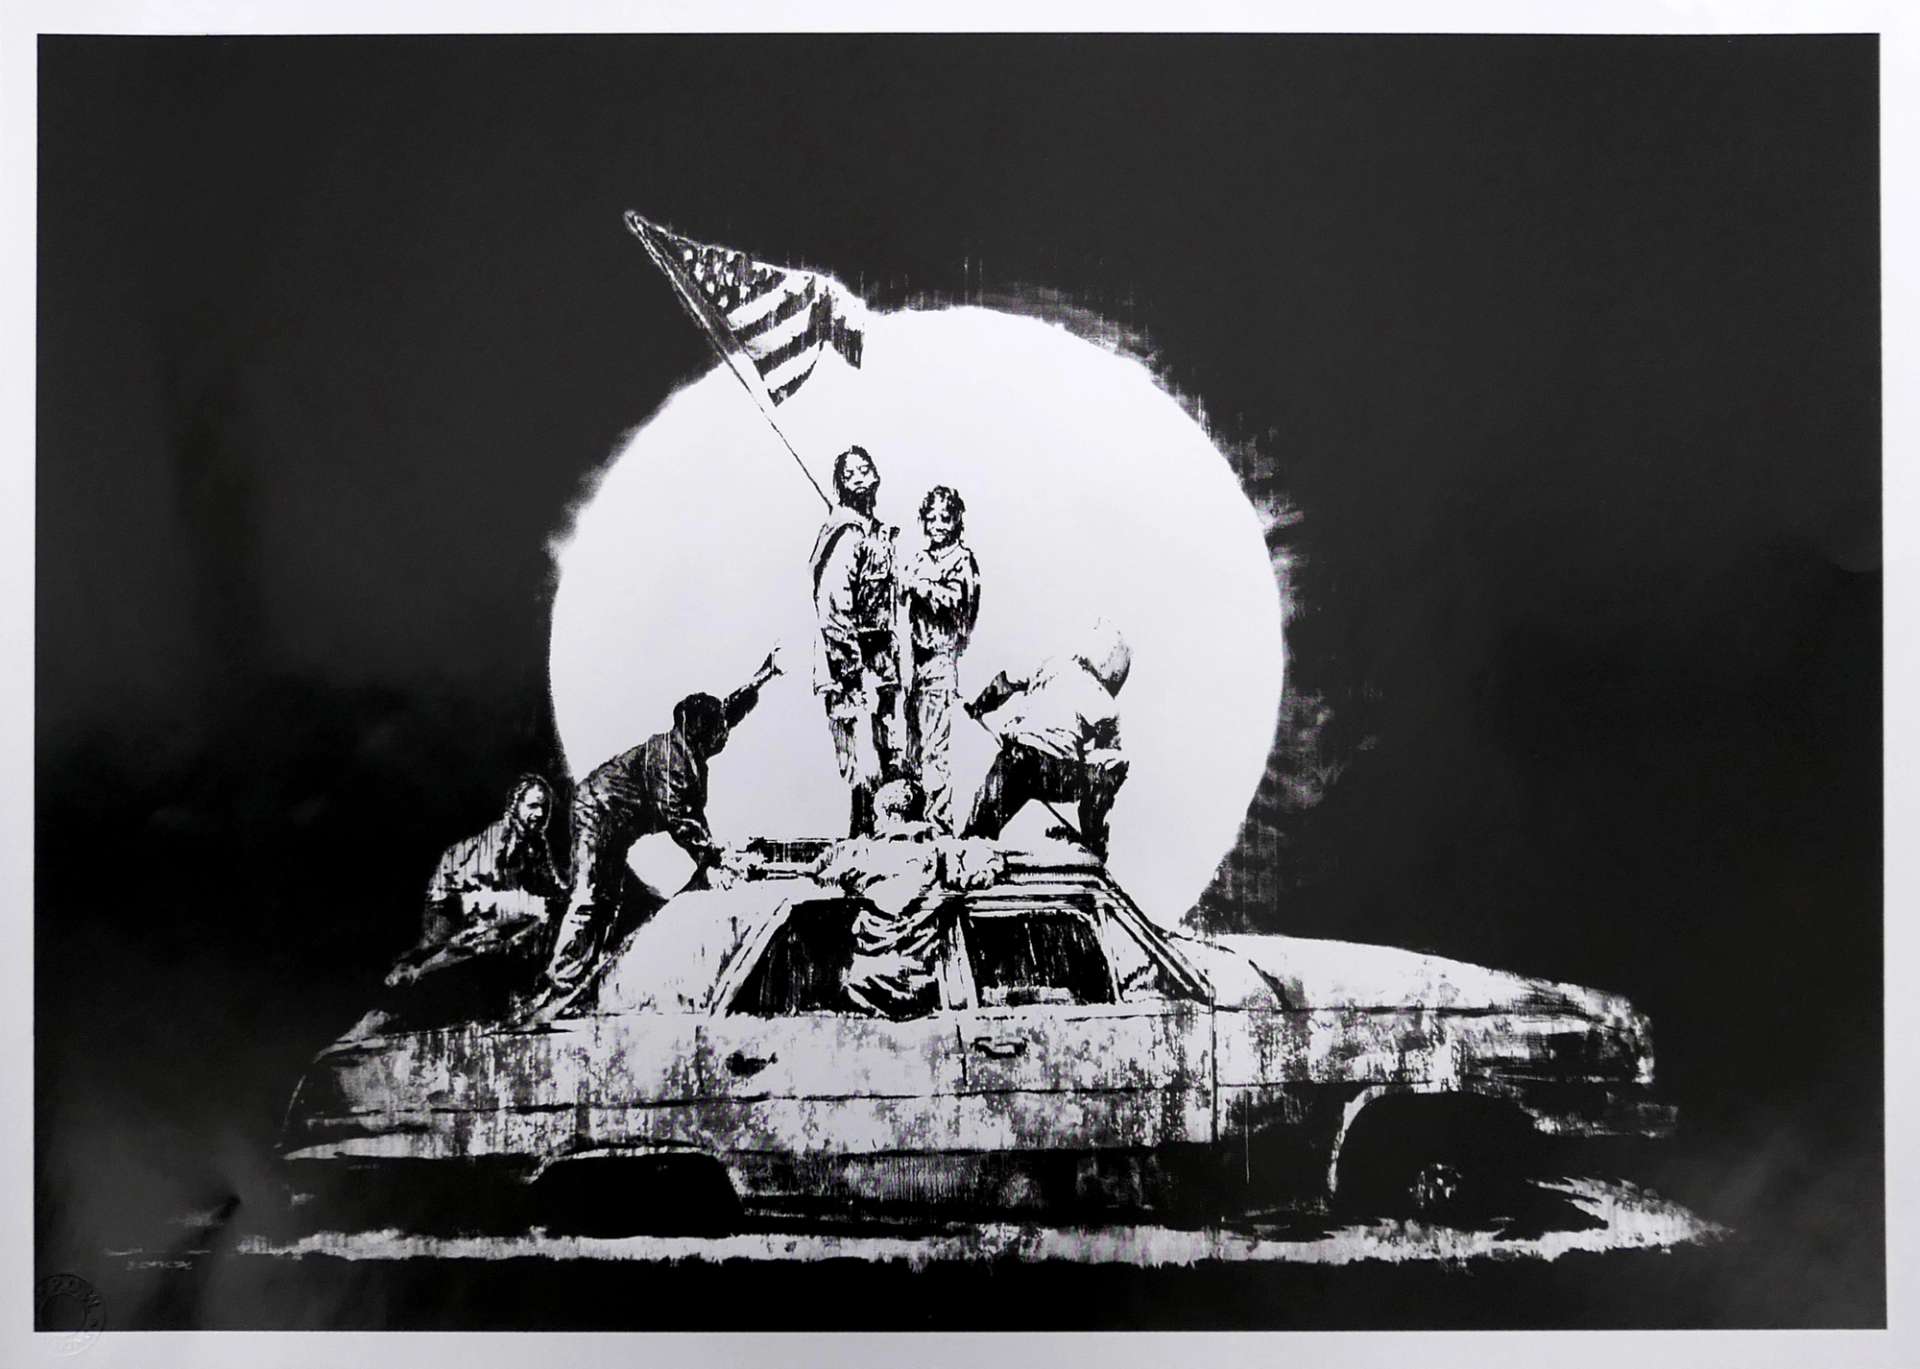 This print parodies Joe Rosenthal's 'Raising the Flag on Iwo Jima' by replacing US marines with urban youths on a car. They are depicted in white and silver against a black background.